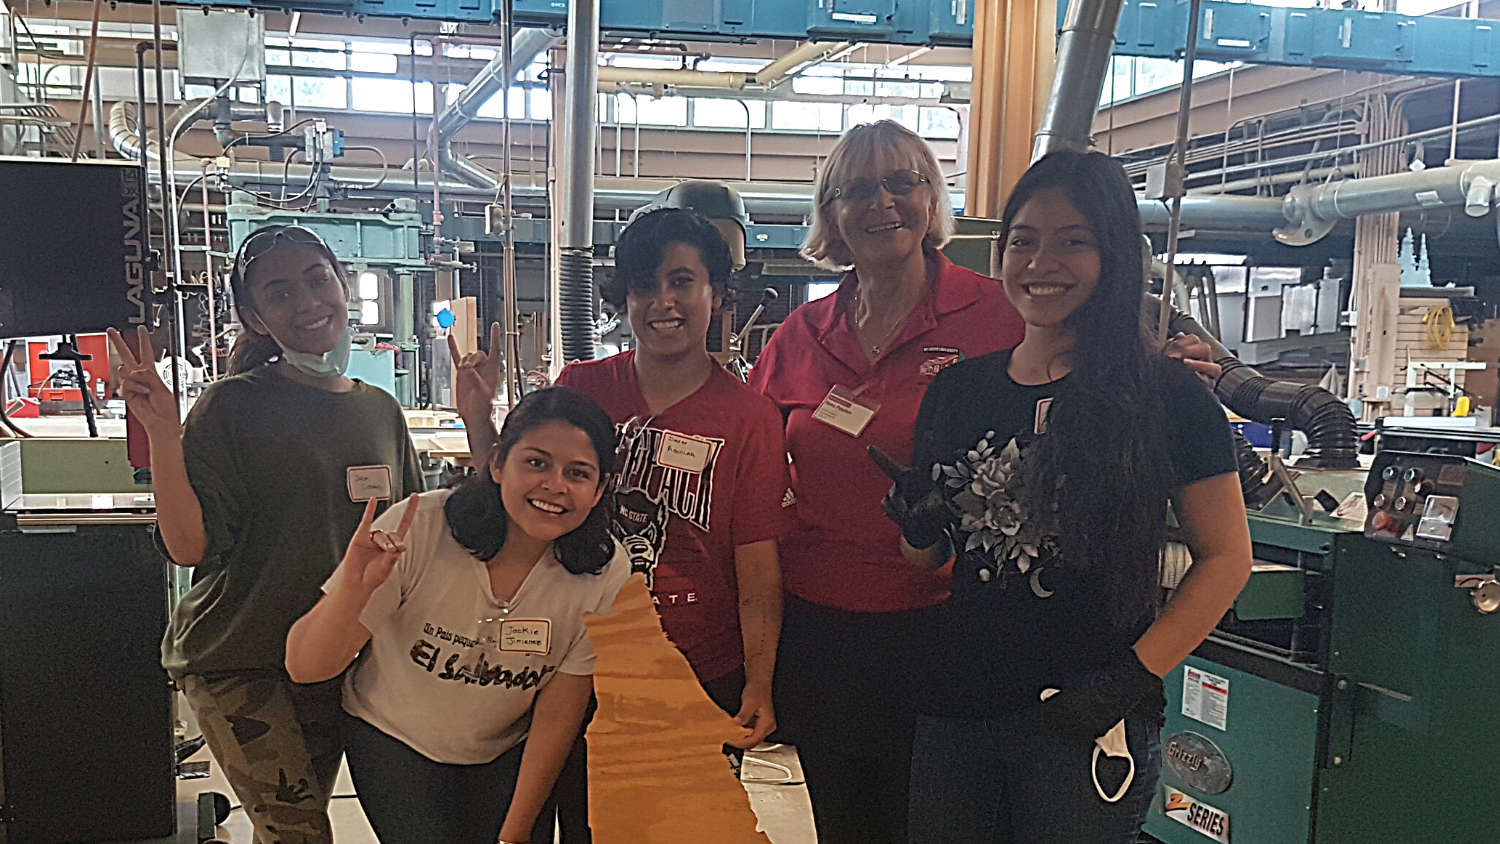 Group Photo in a Lab - Immersive Biomaterials Workshop Jumpstarts Academic Career for Women of Color in NC - Forest Biomaterials NC State University